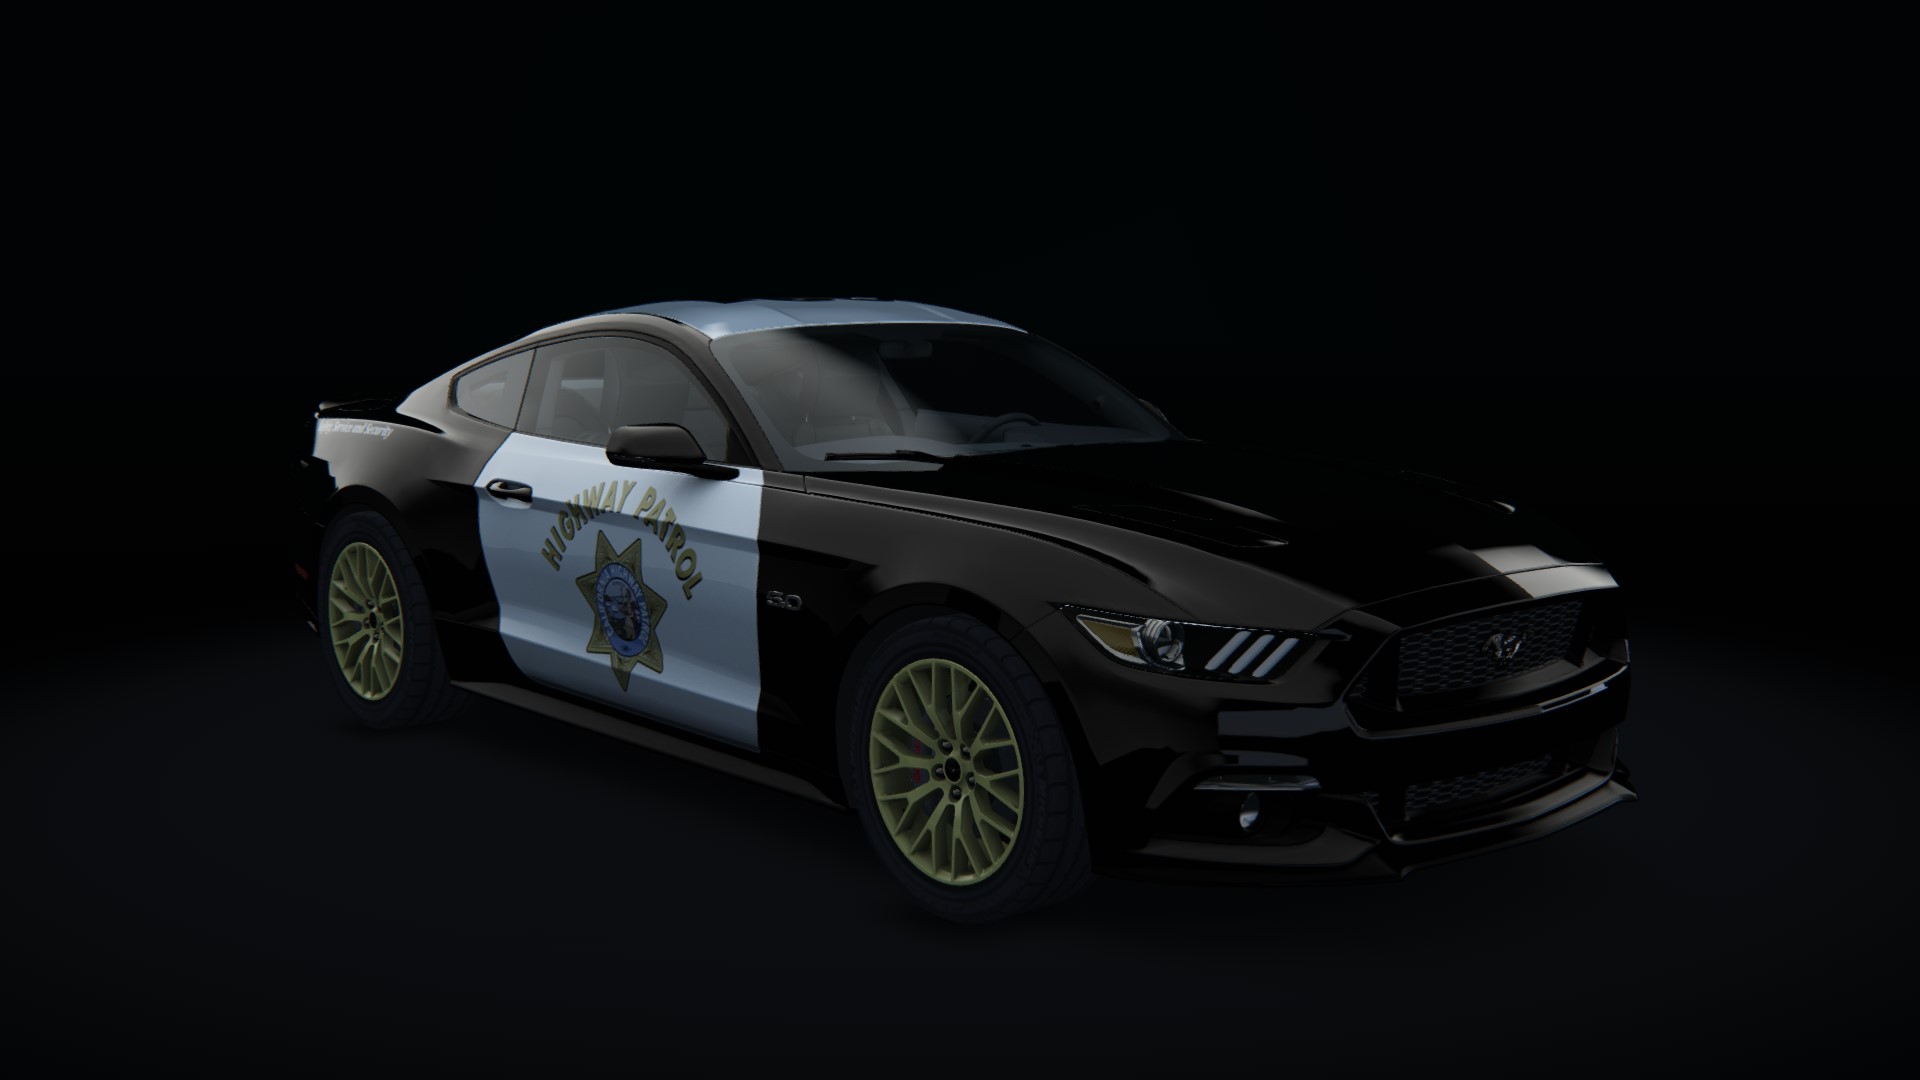 Ford Mustang 2015, skin chp_unit_201